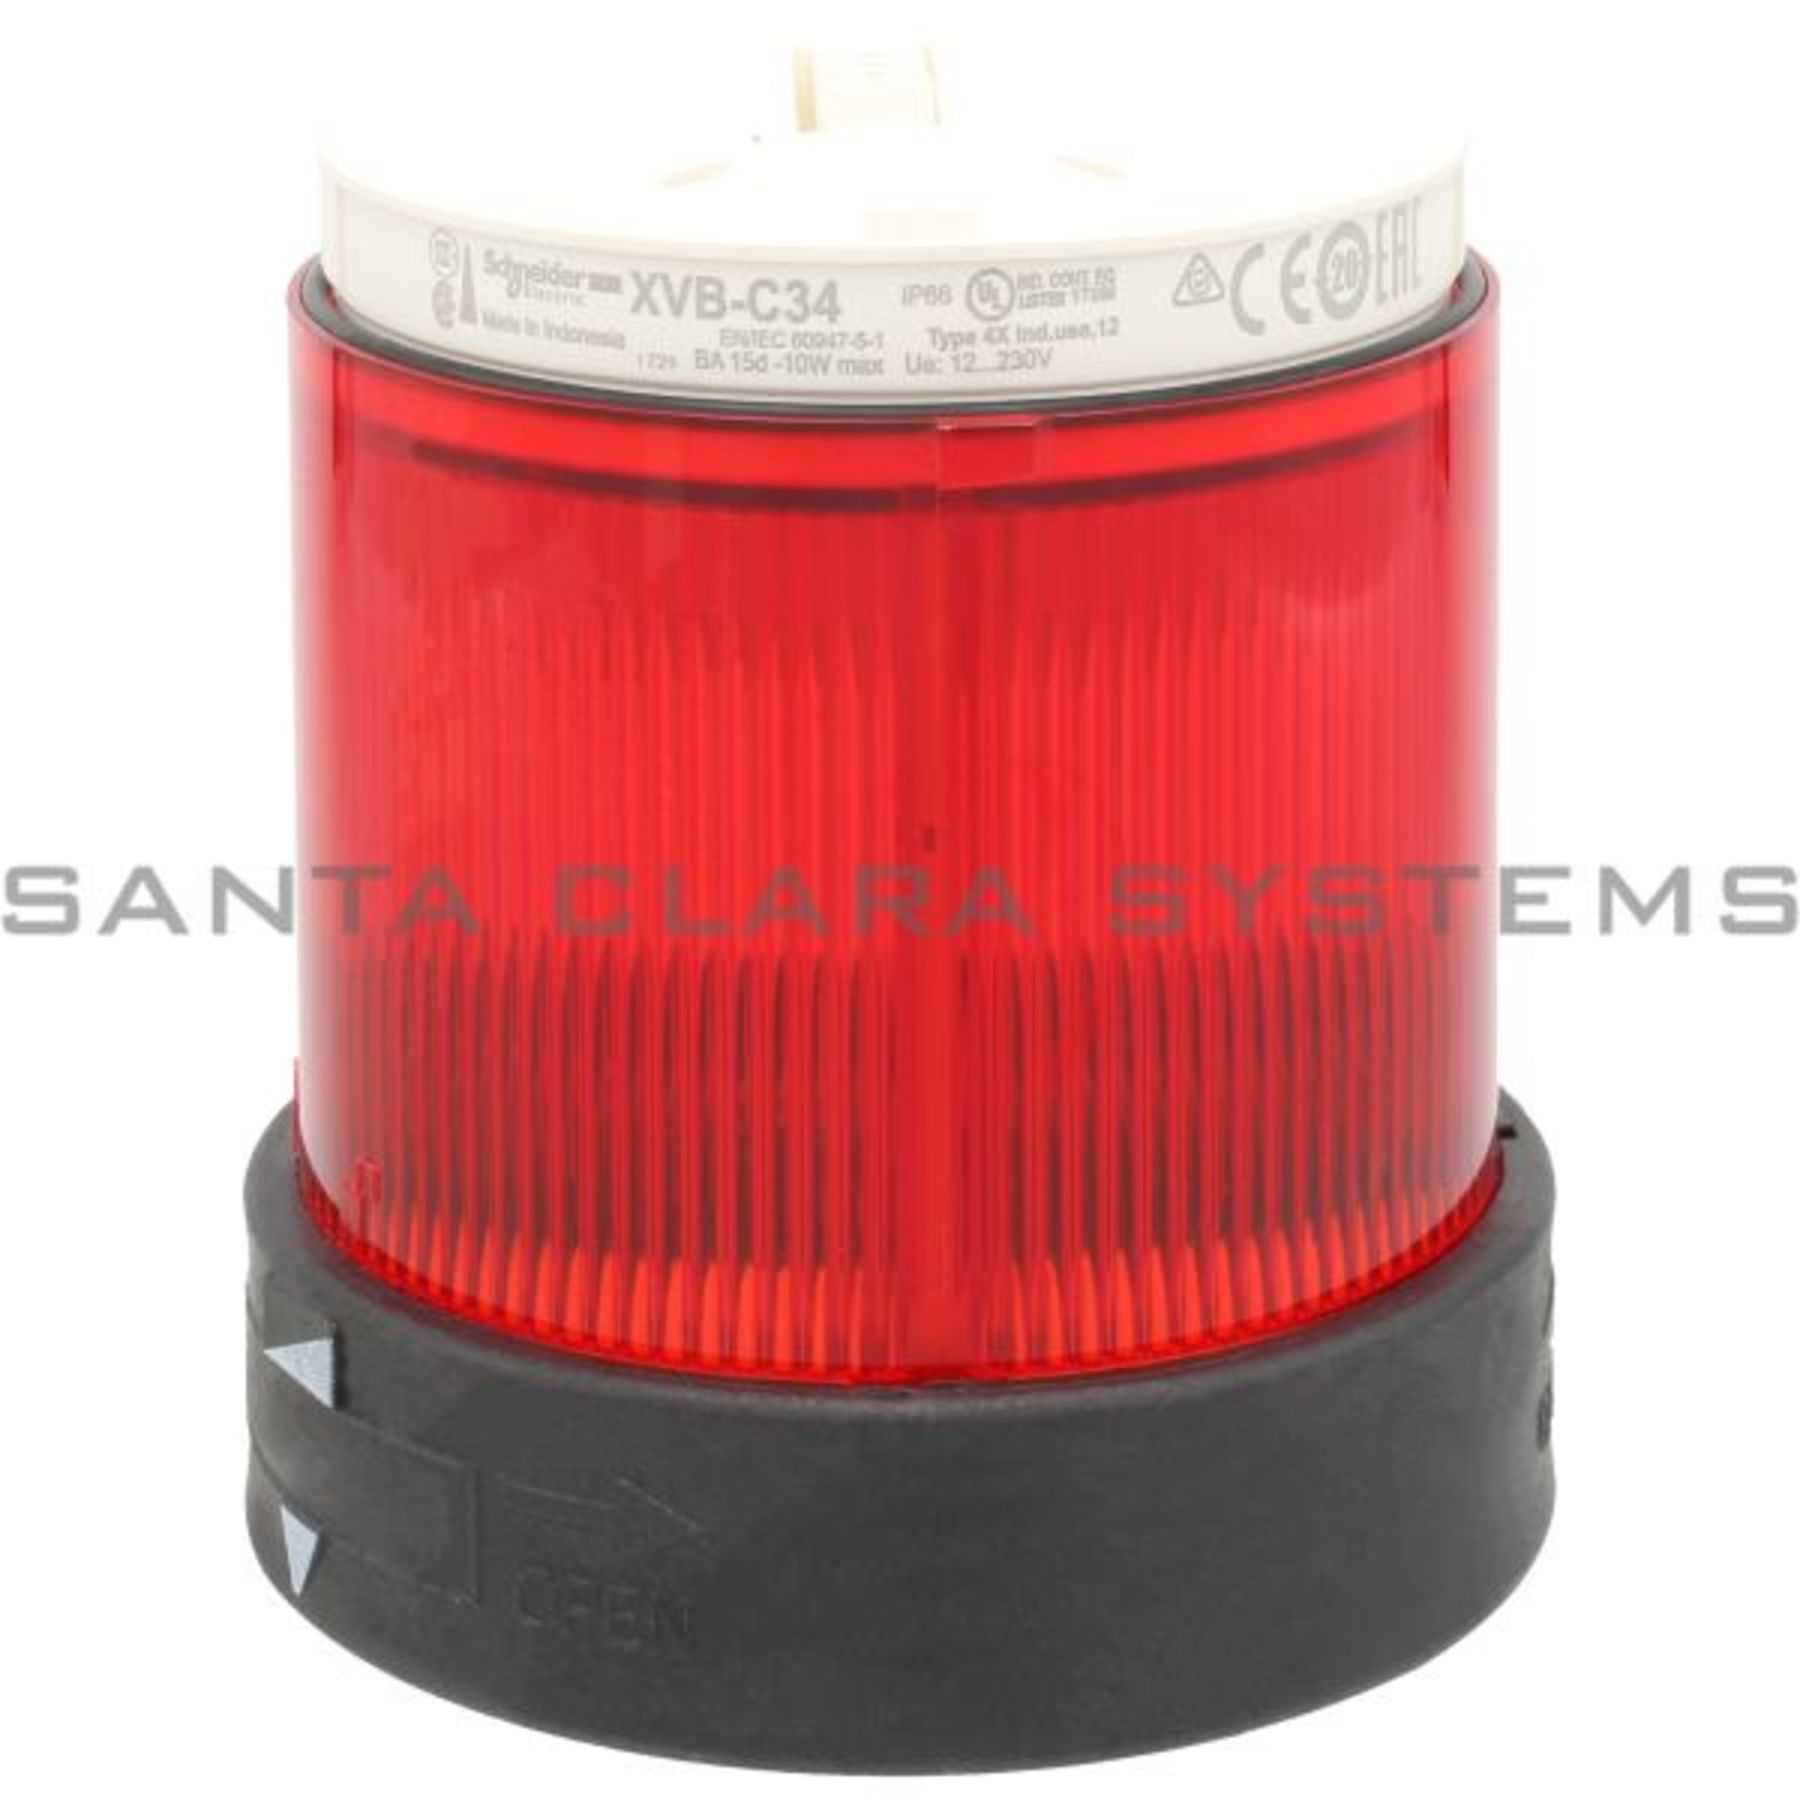 Schneider Electric 084507 Red Steady Stacklight Beacon XVB C34 TELEMECANIQUE for sale online 